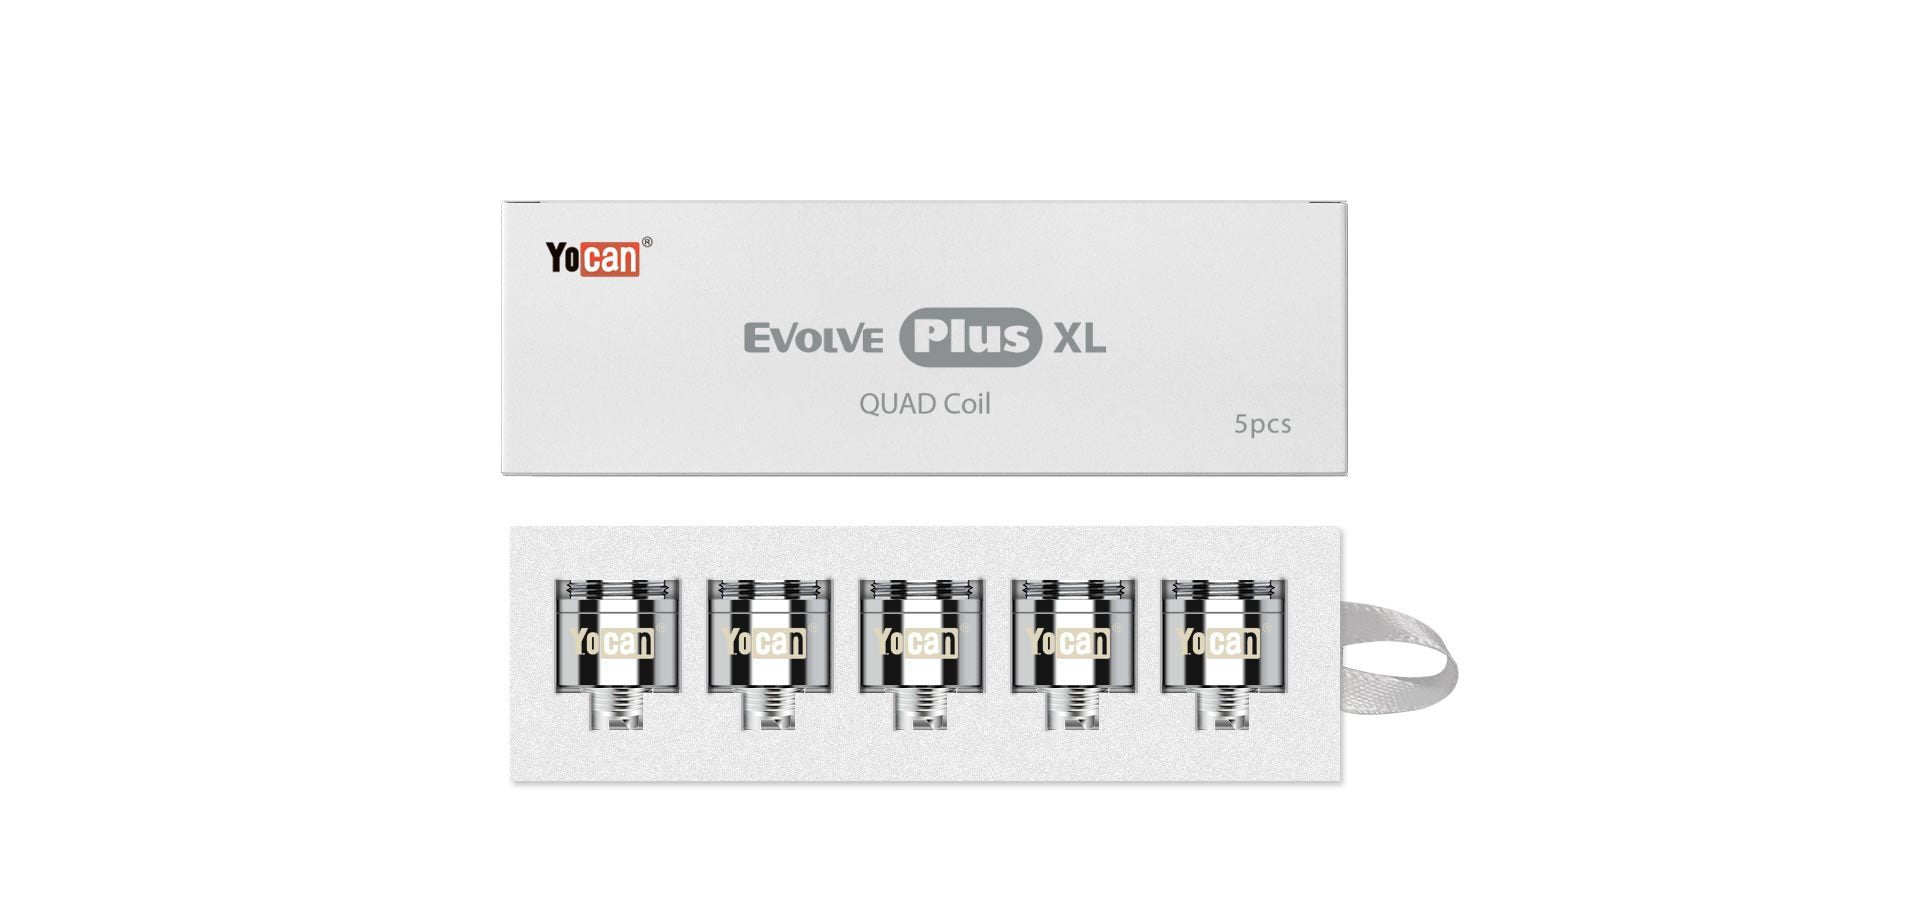 Yocan Evolve Plus XL Replacement Coils (5 pack) Vaporizer Coil Yocan 